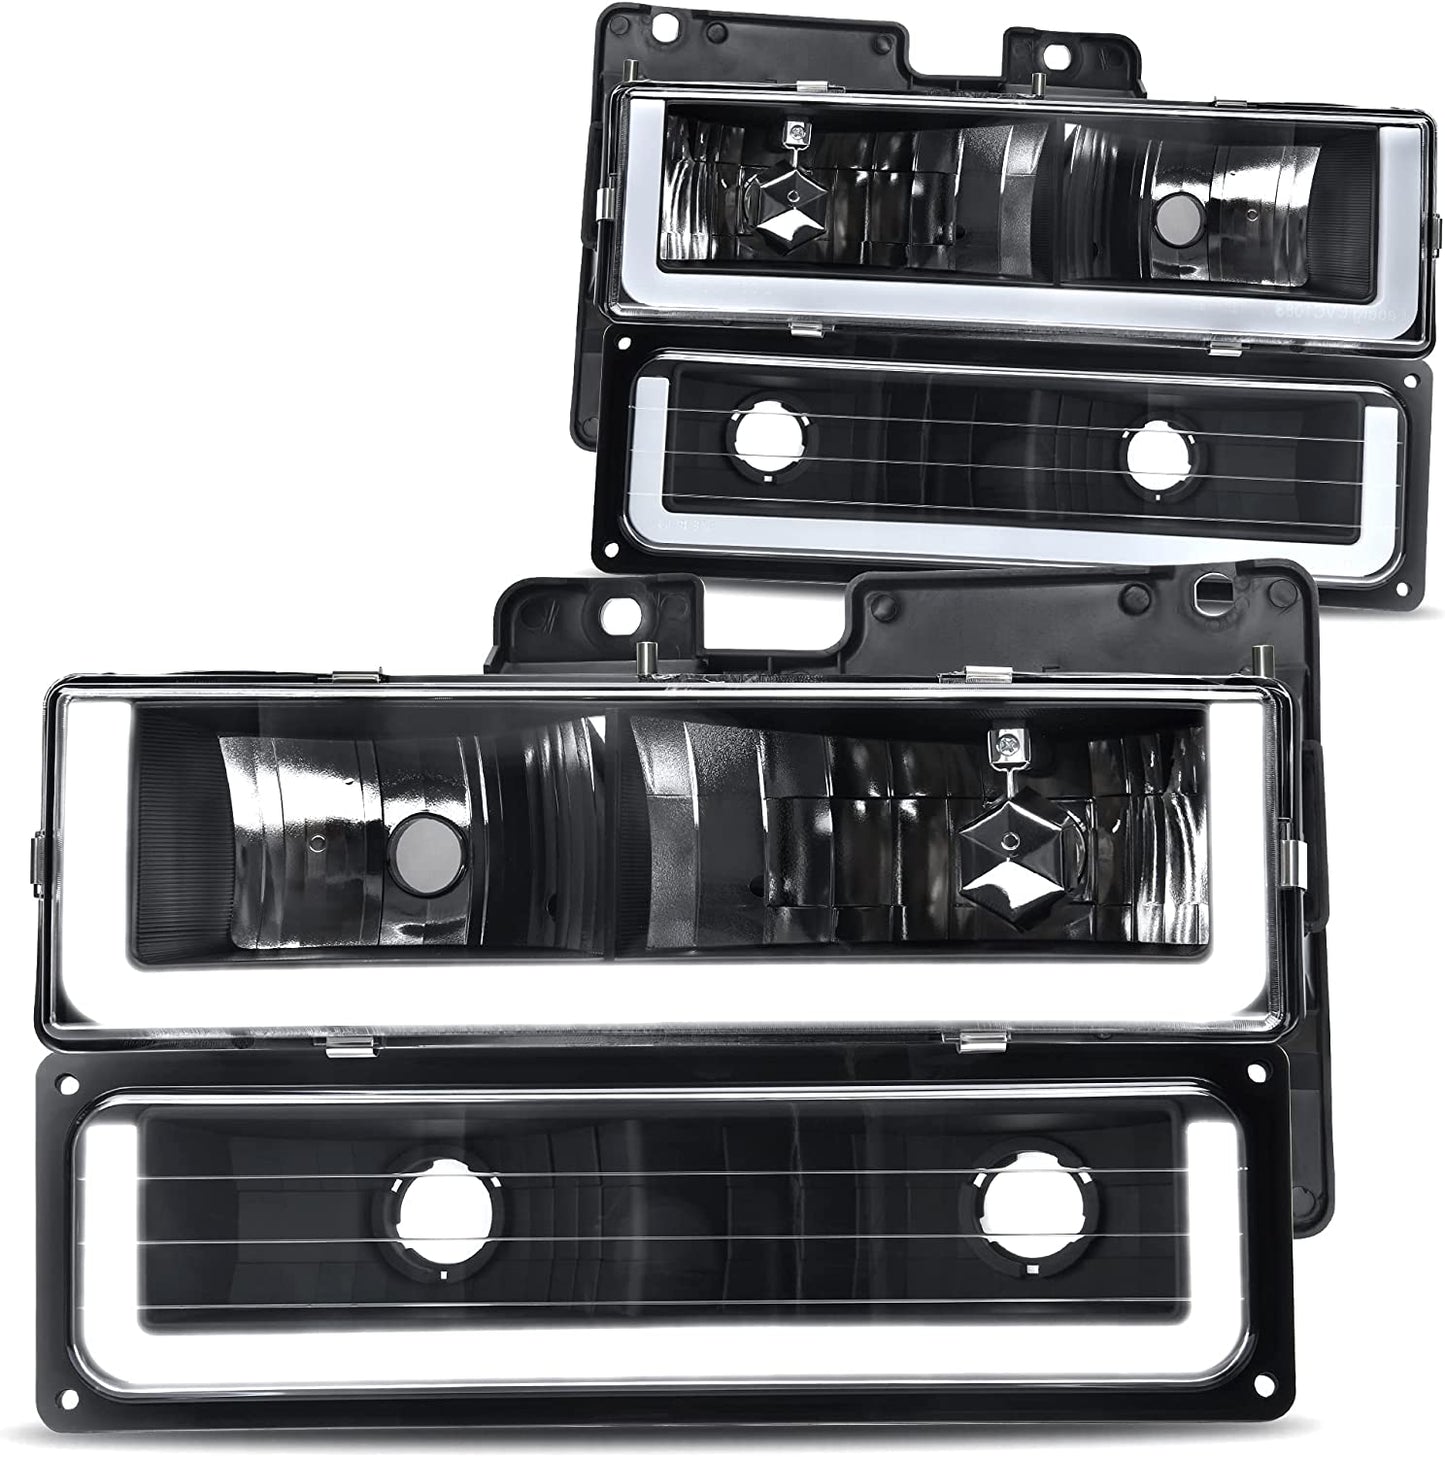 DWVO Headlight Assembly Compatible with 1994-1999 Chevy C/K Series 1500, 2500, 3500/Tahoe/Suburban/Silverado, w/Corner and Bumper Lights, Black Housing